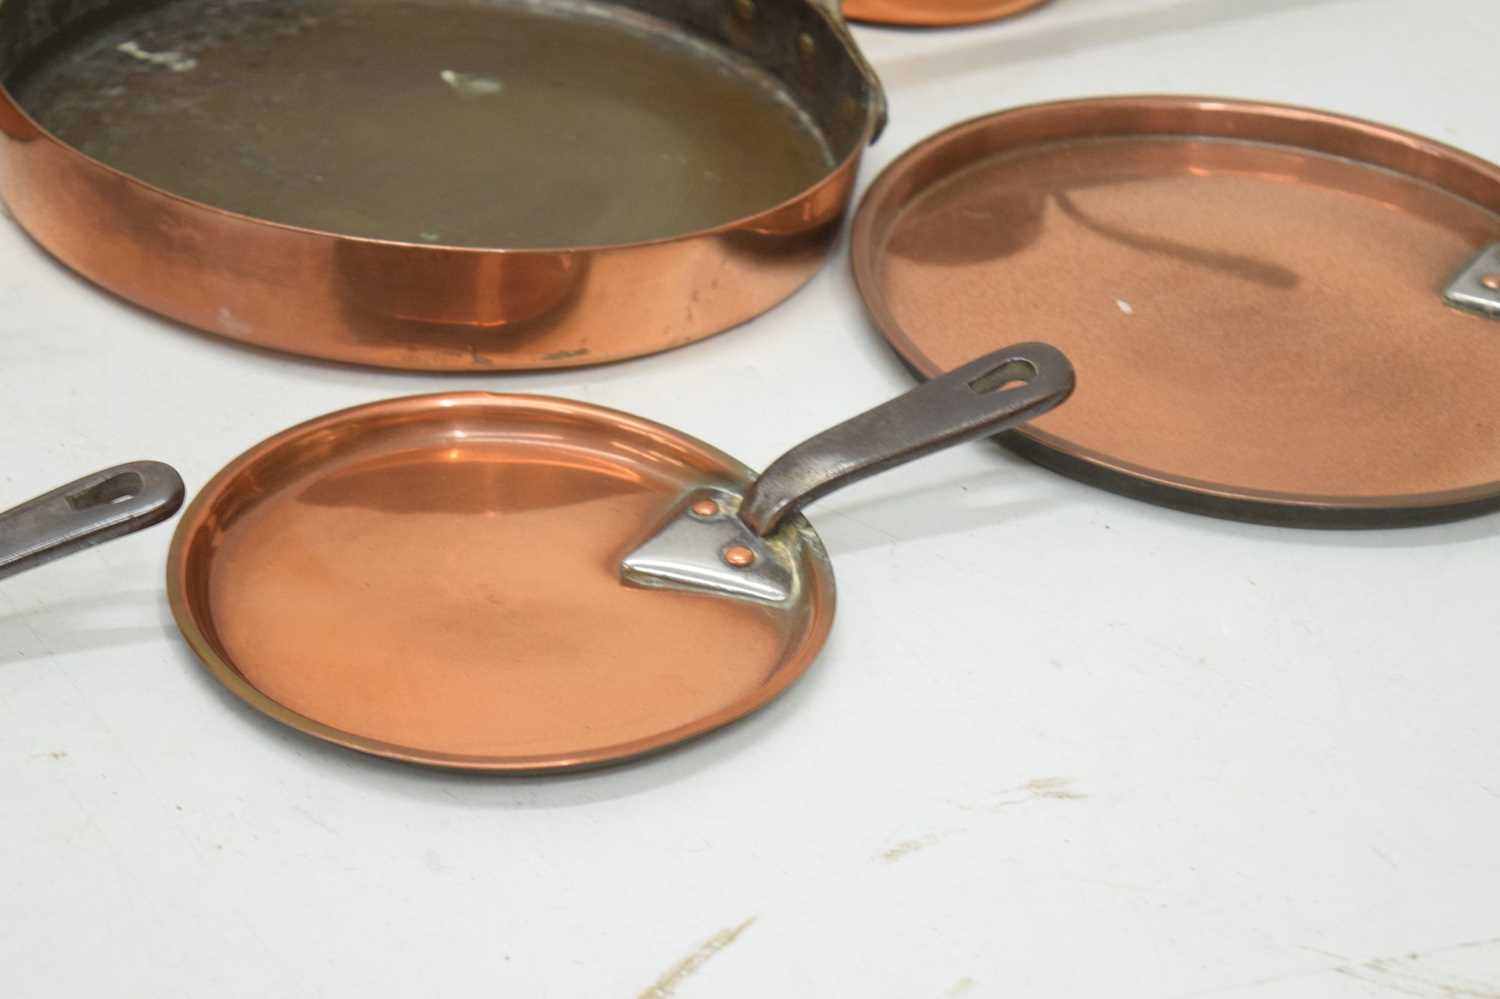 Graduated set of four copper saucepans with iron handles - Image 6 of 9